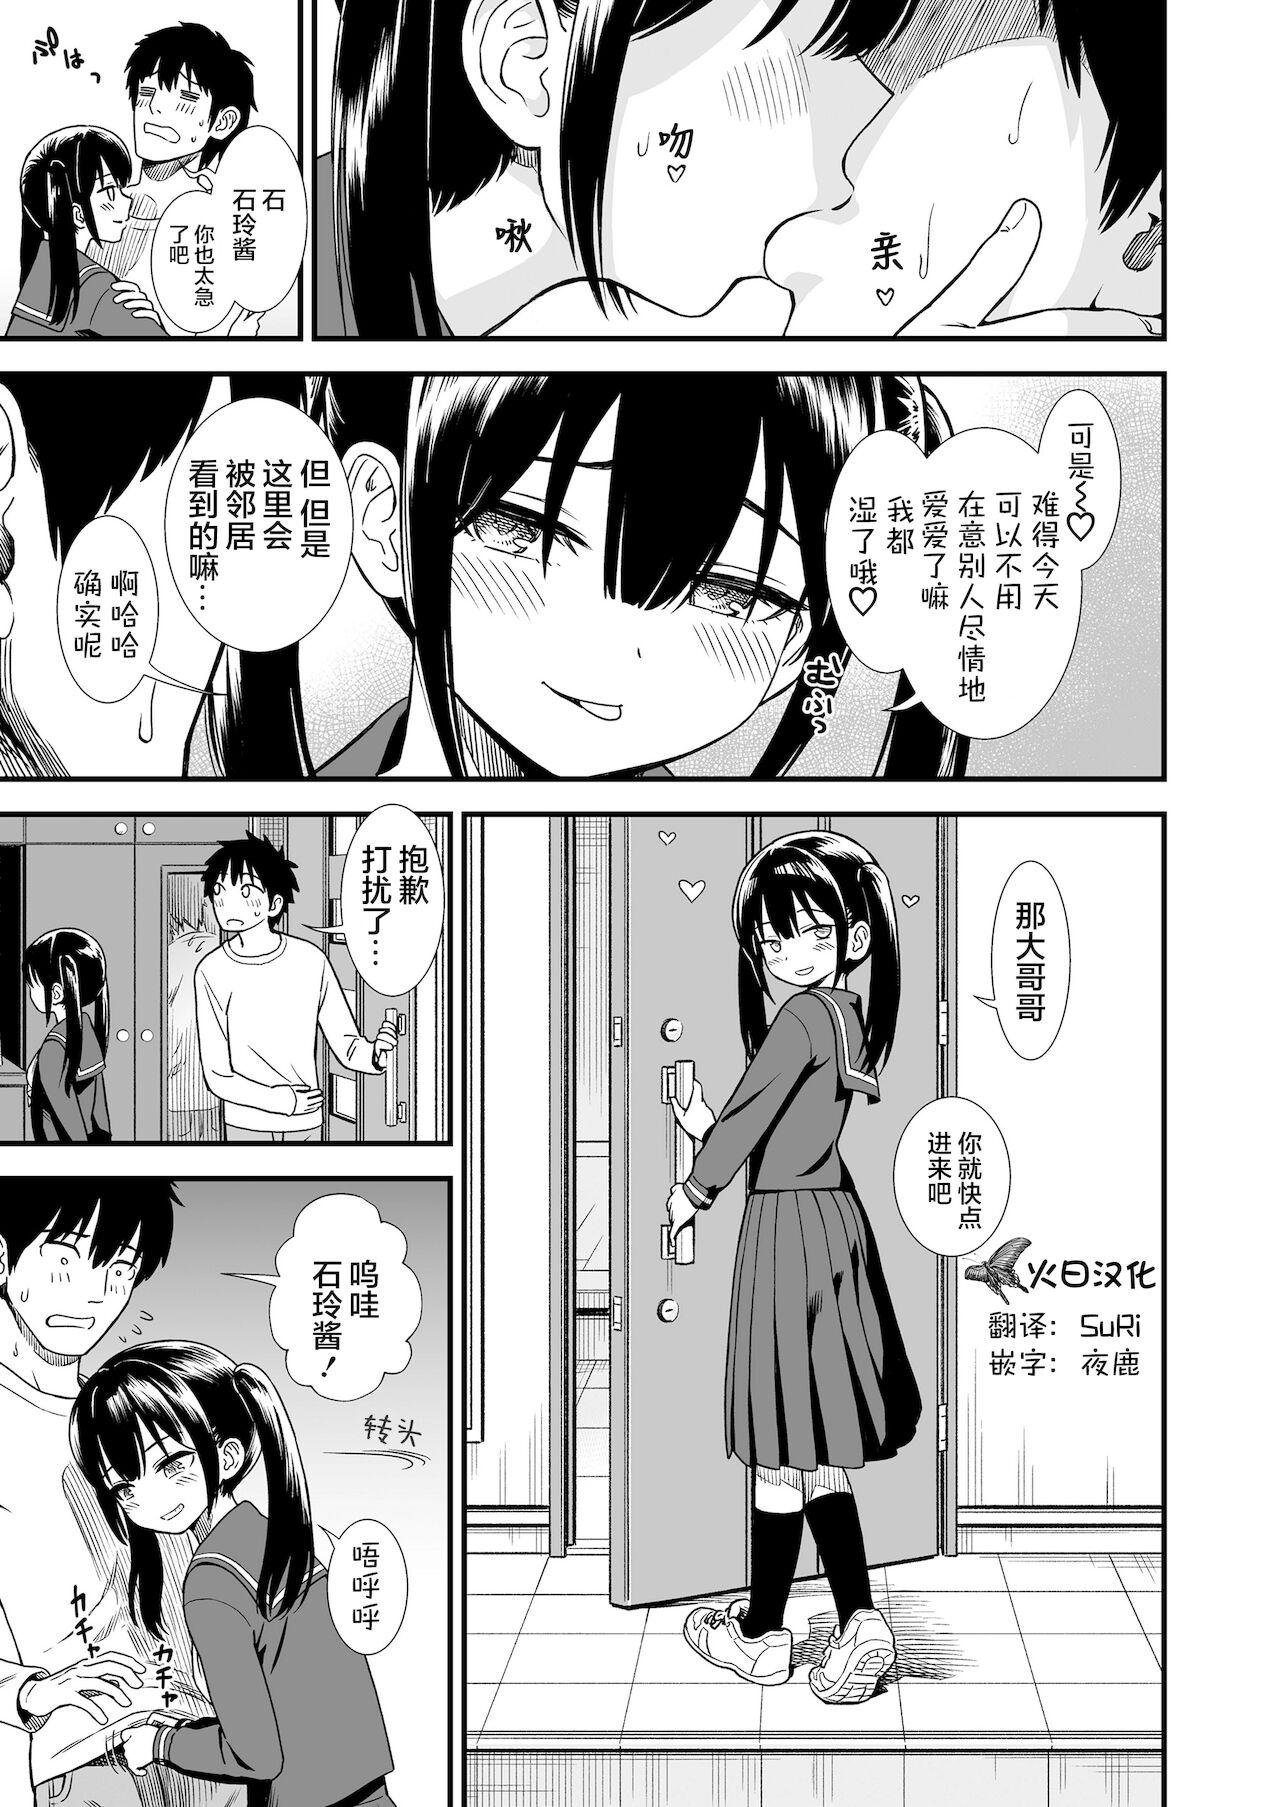 Married Imouto no Tomodachi Homecoming | 妹妹的朋友 Homecoming Doctor - Page 4